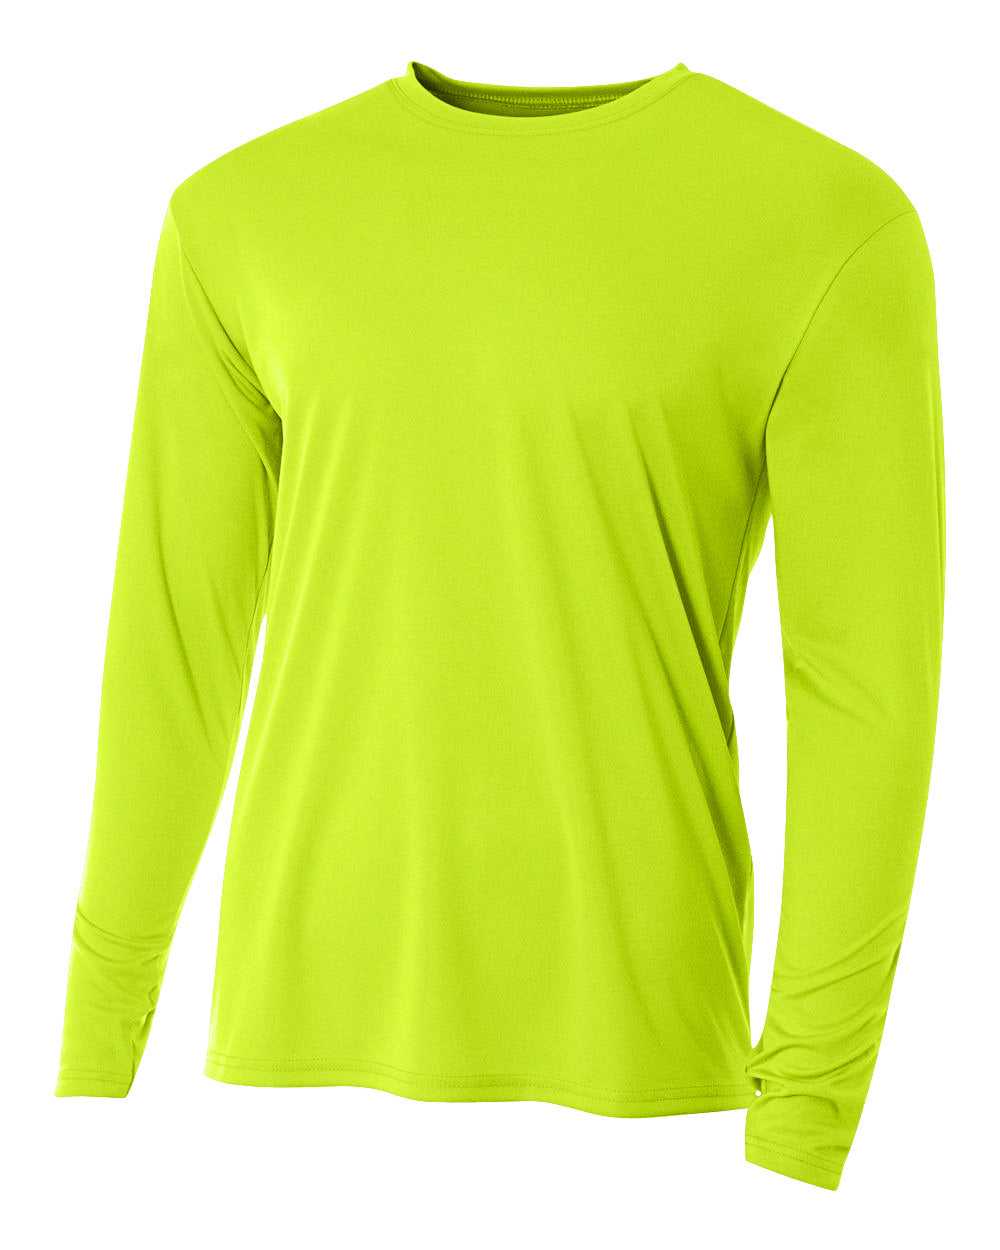 A4 N3165 Cooling Performance Long Sleeve Crew - Lime